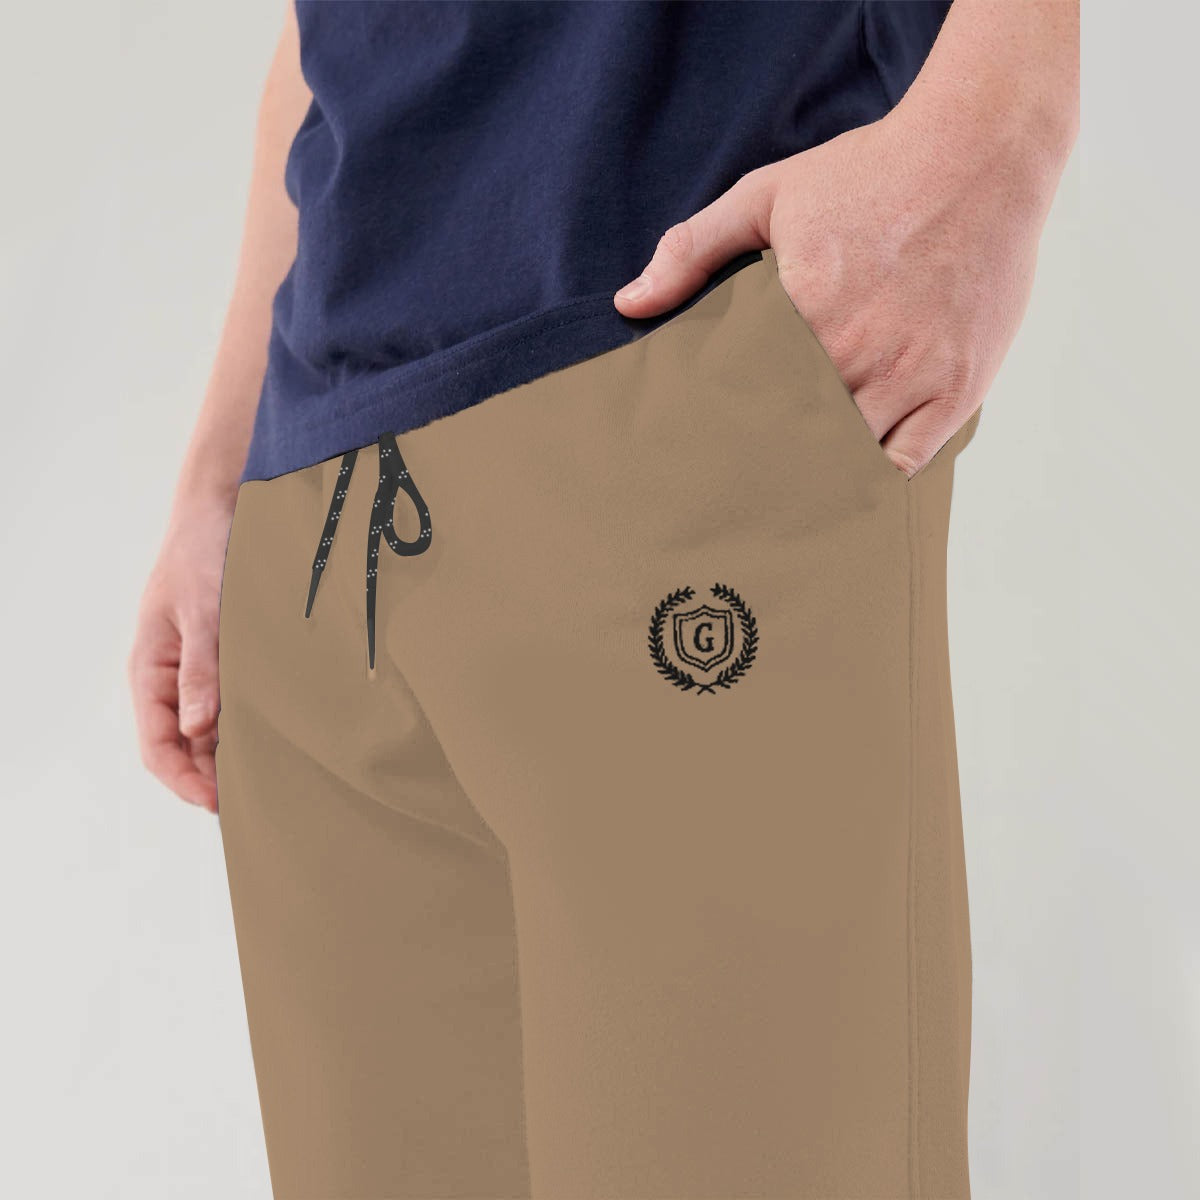 HG SIGNATURE EMB SOFT COTTON TROUSER - MUSTERED